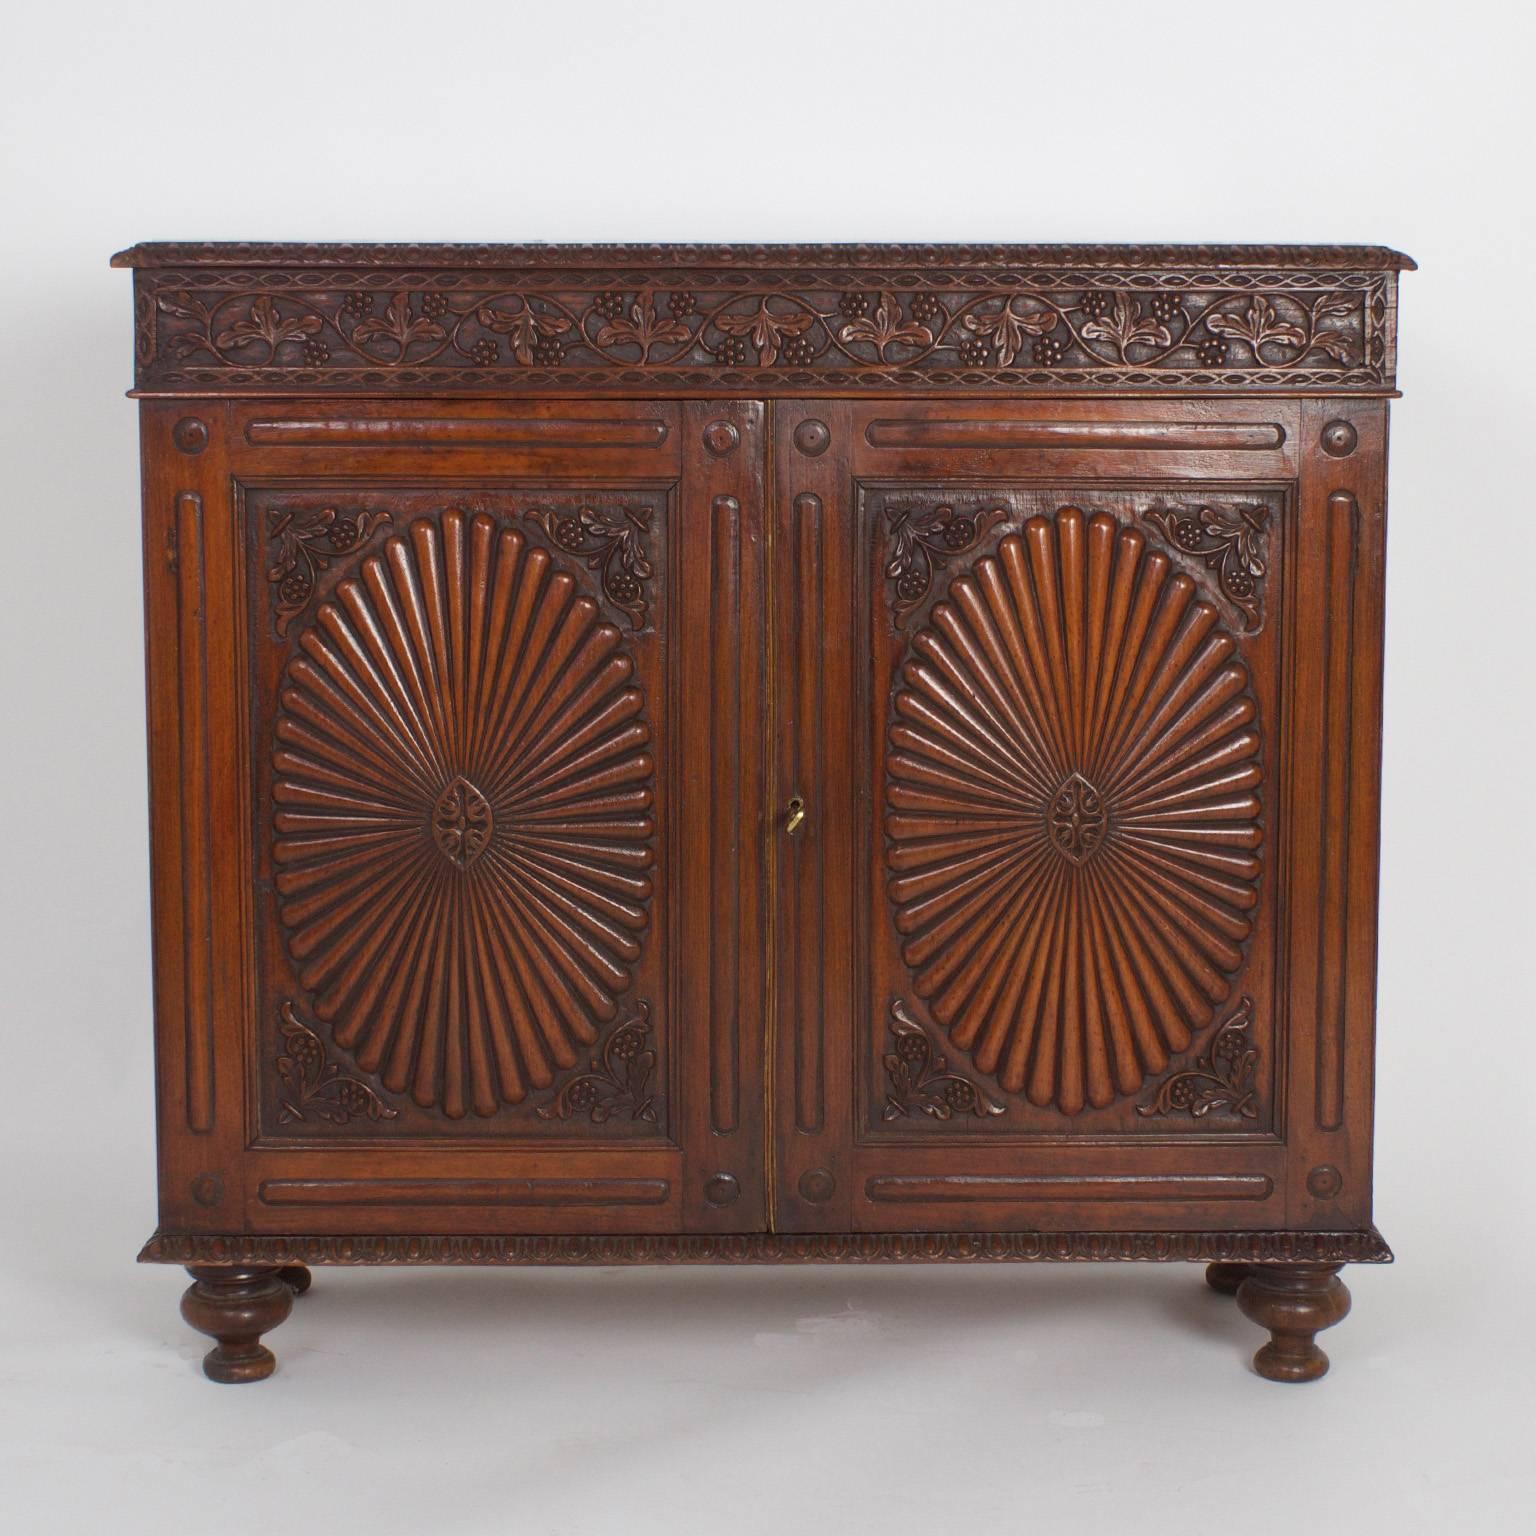 The pair of antique, Anglo-Indian servers, sideboards or cabinets that inspire admiration. Expertly crafted with tropical rosewood and carved with a confident, artistic hand. Featuring inset white marble tops with a pale grey grain, egg, and dart